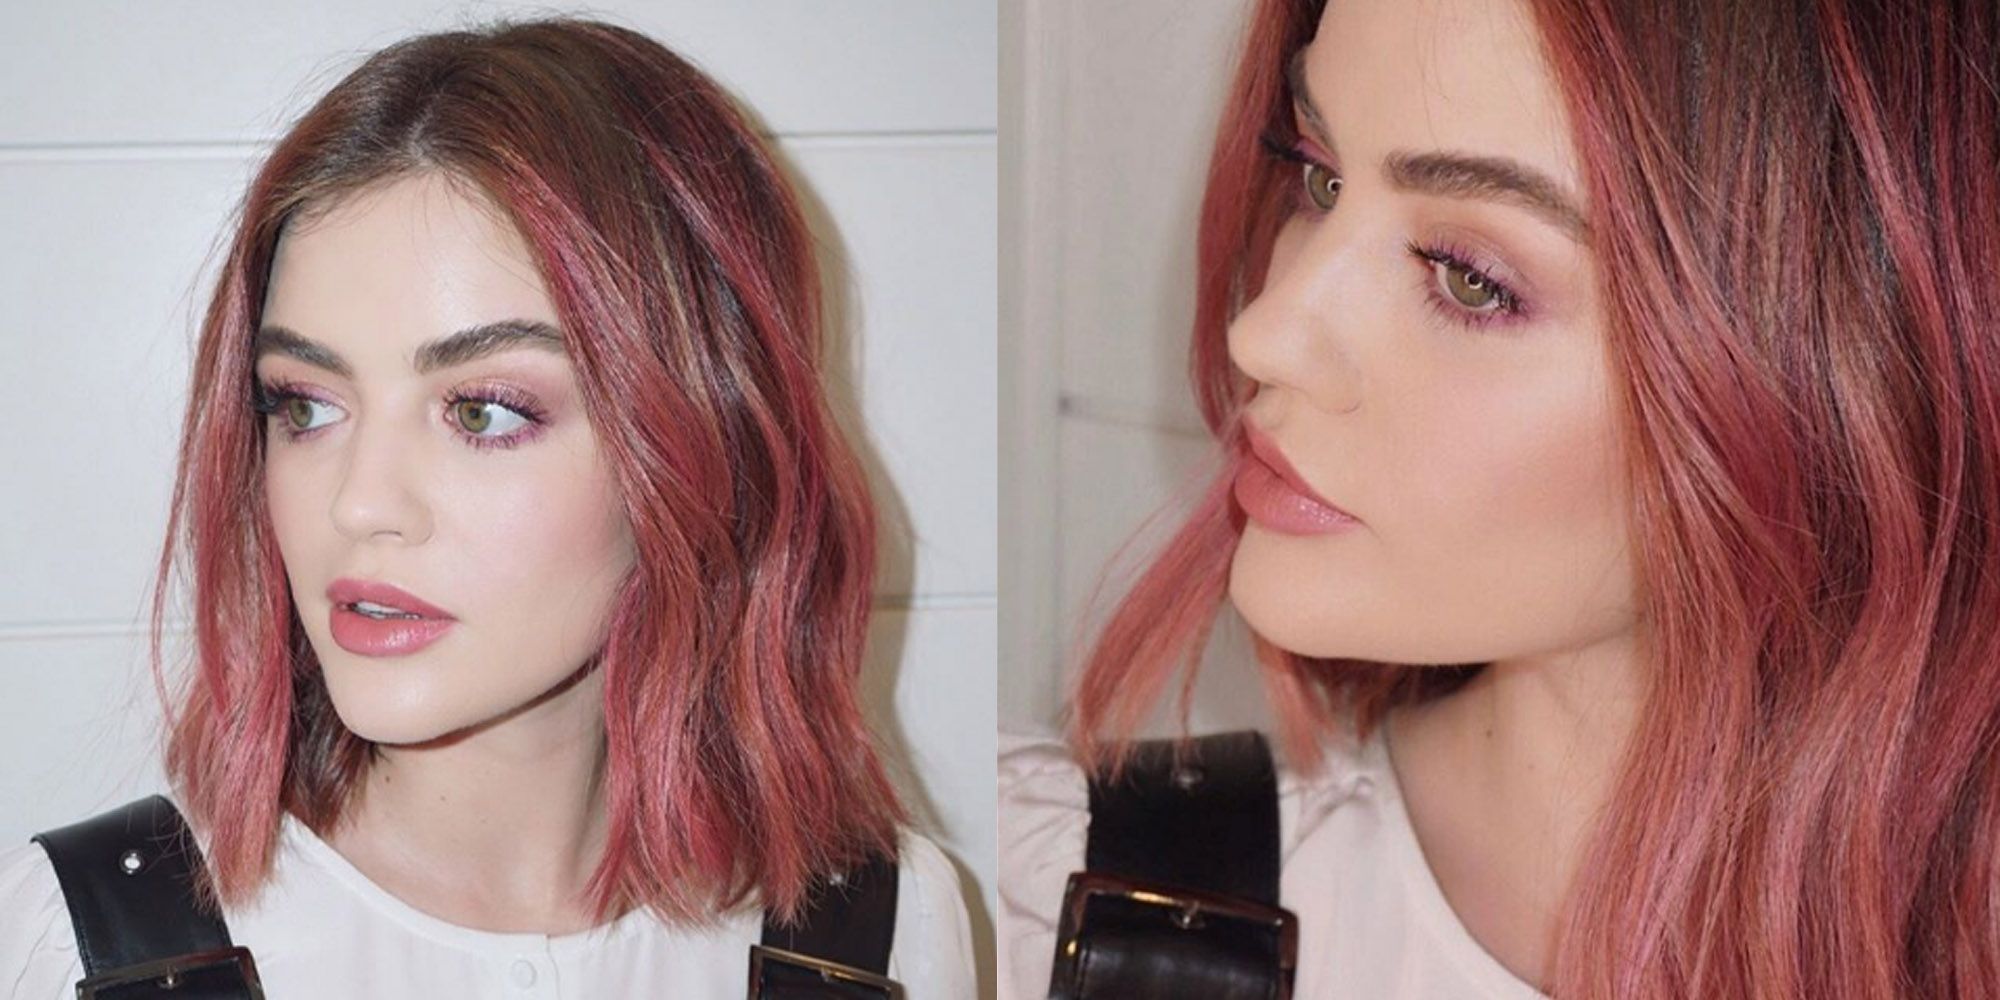 How To Remove Pink Hair Dye: Let's Get the Pink Color Out